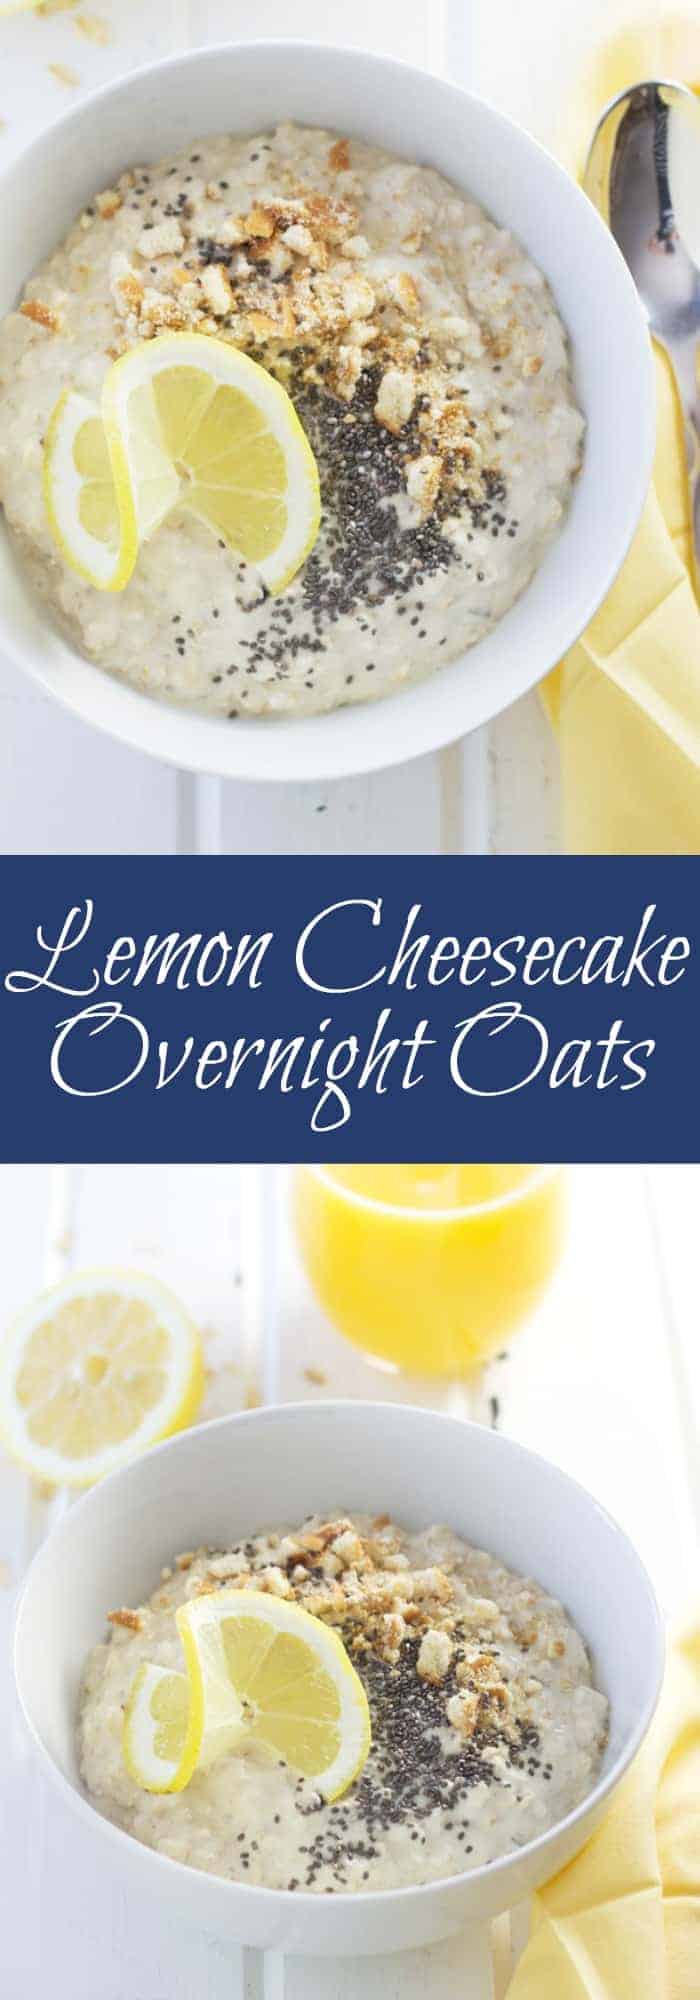 titled image (and shown): lemon cheesecake overnight oats